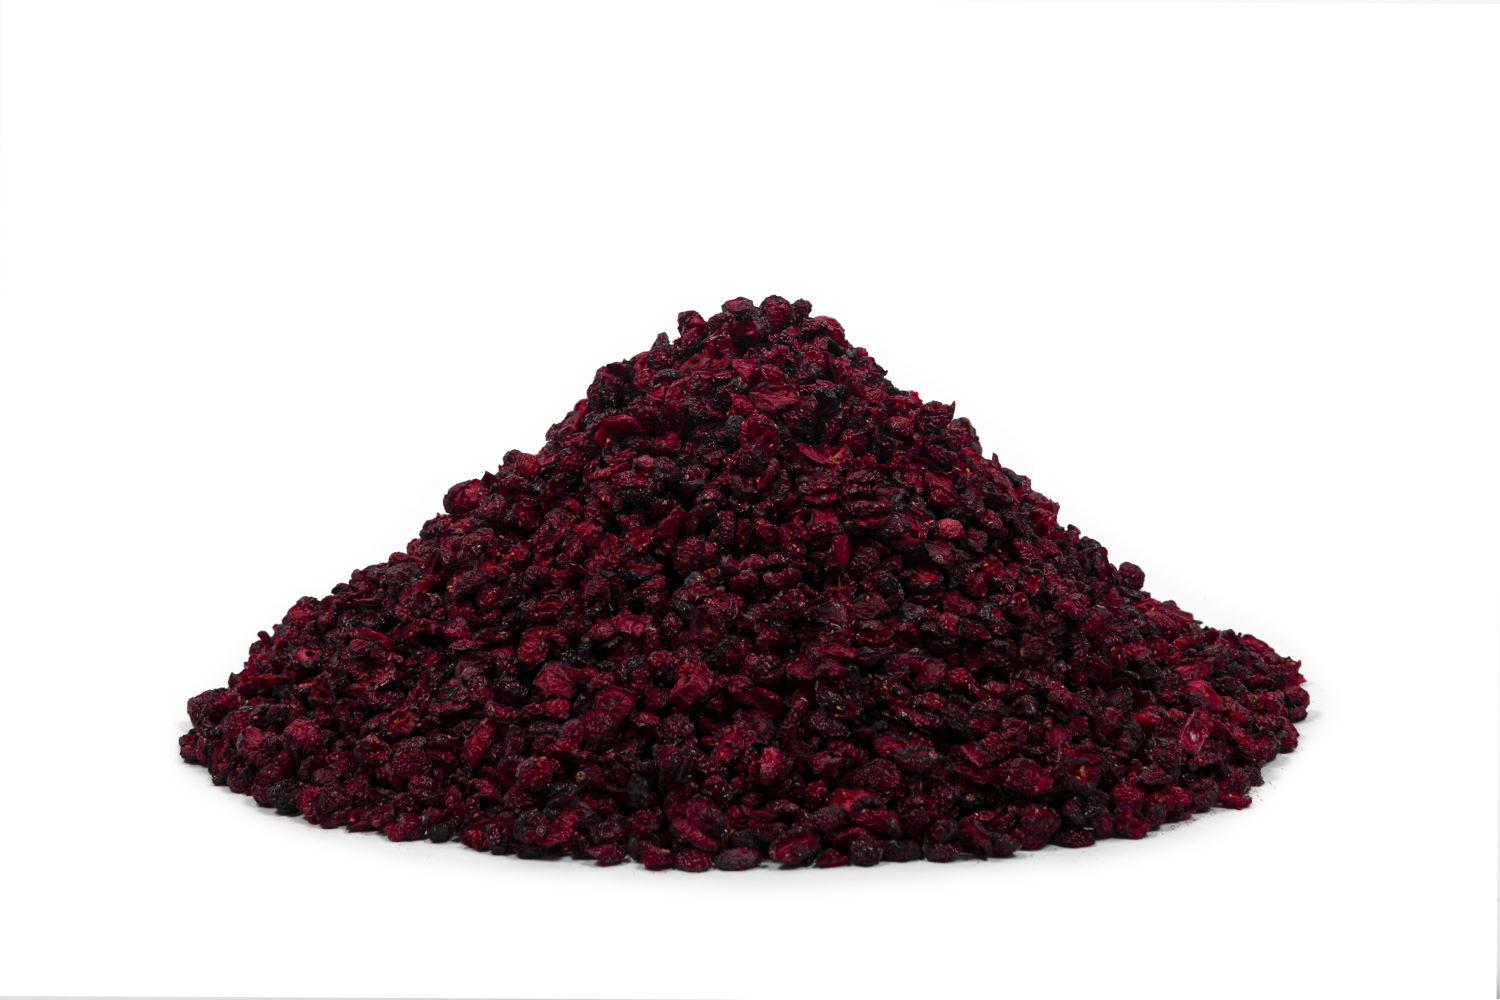 Dehydrated cranberry slices